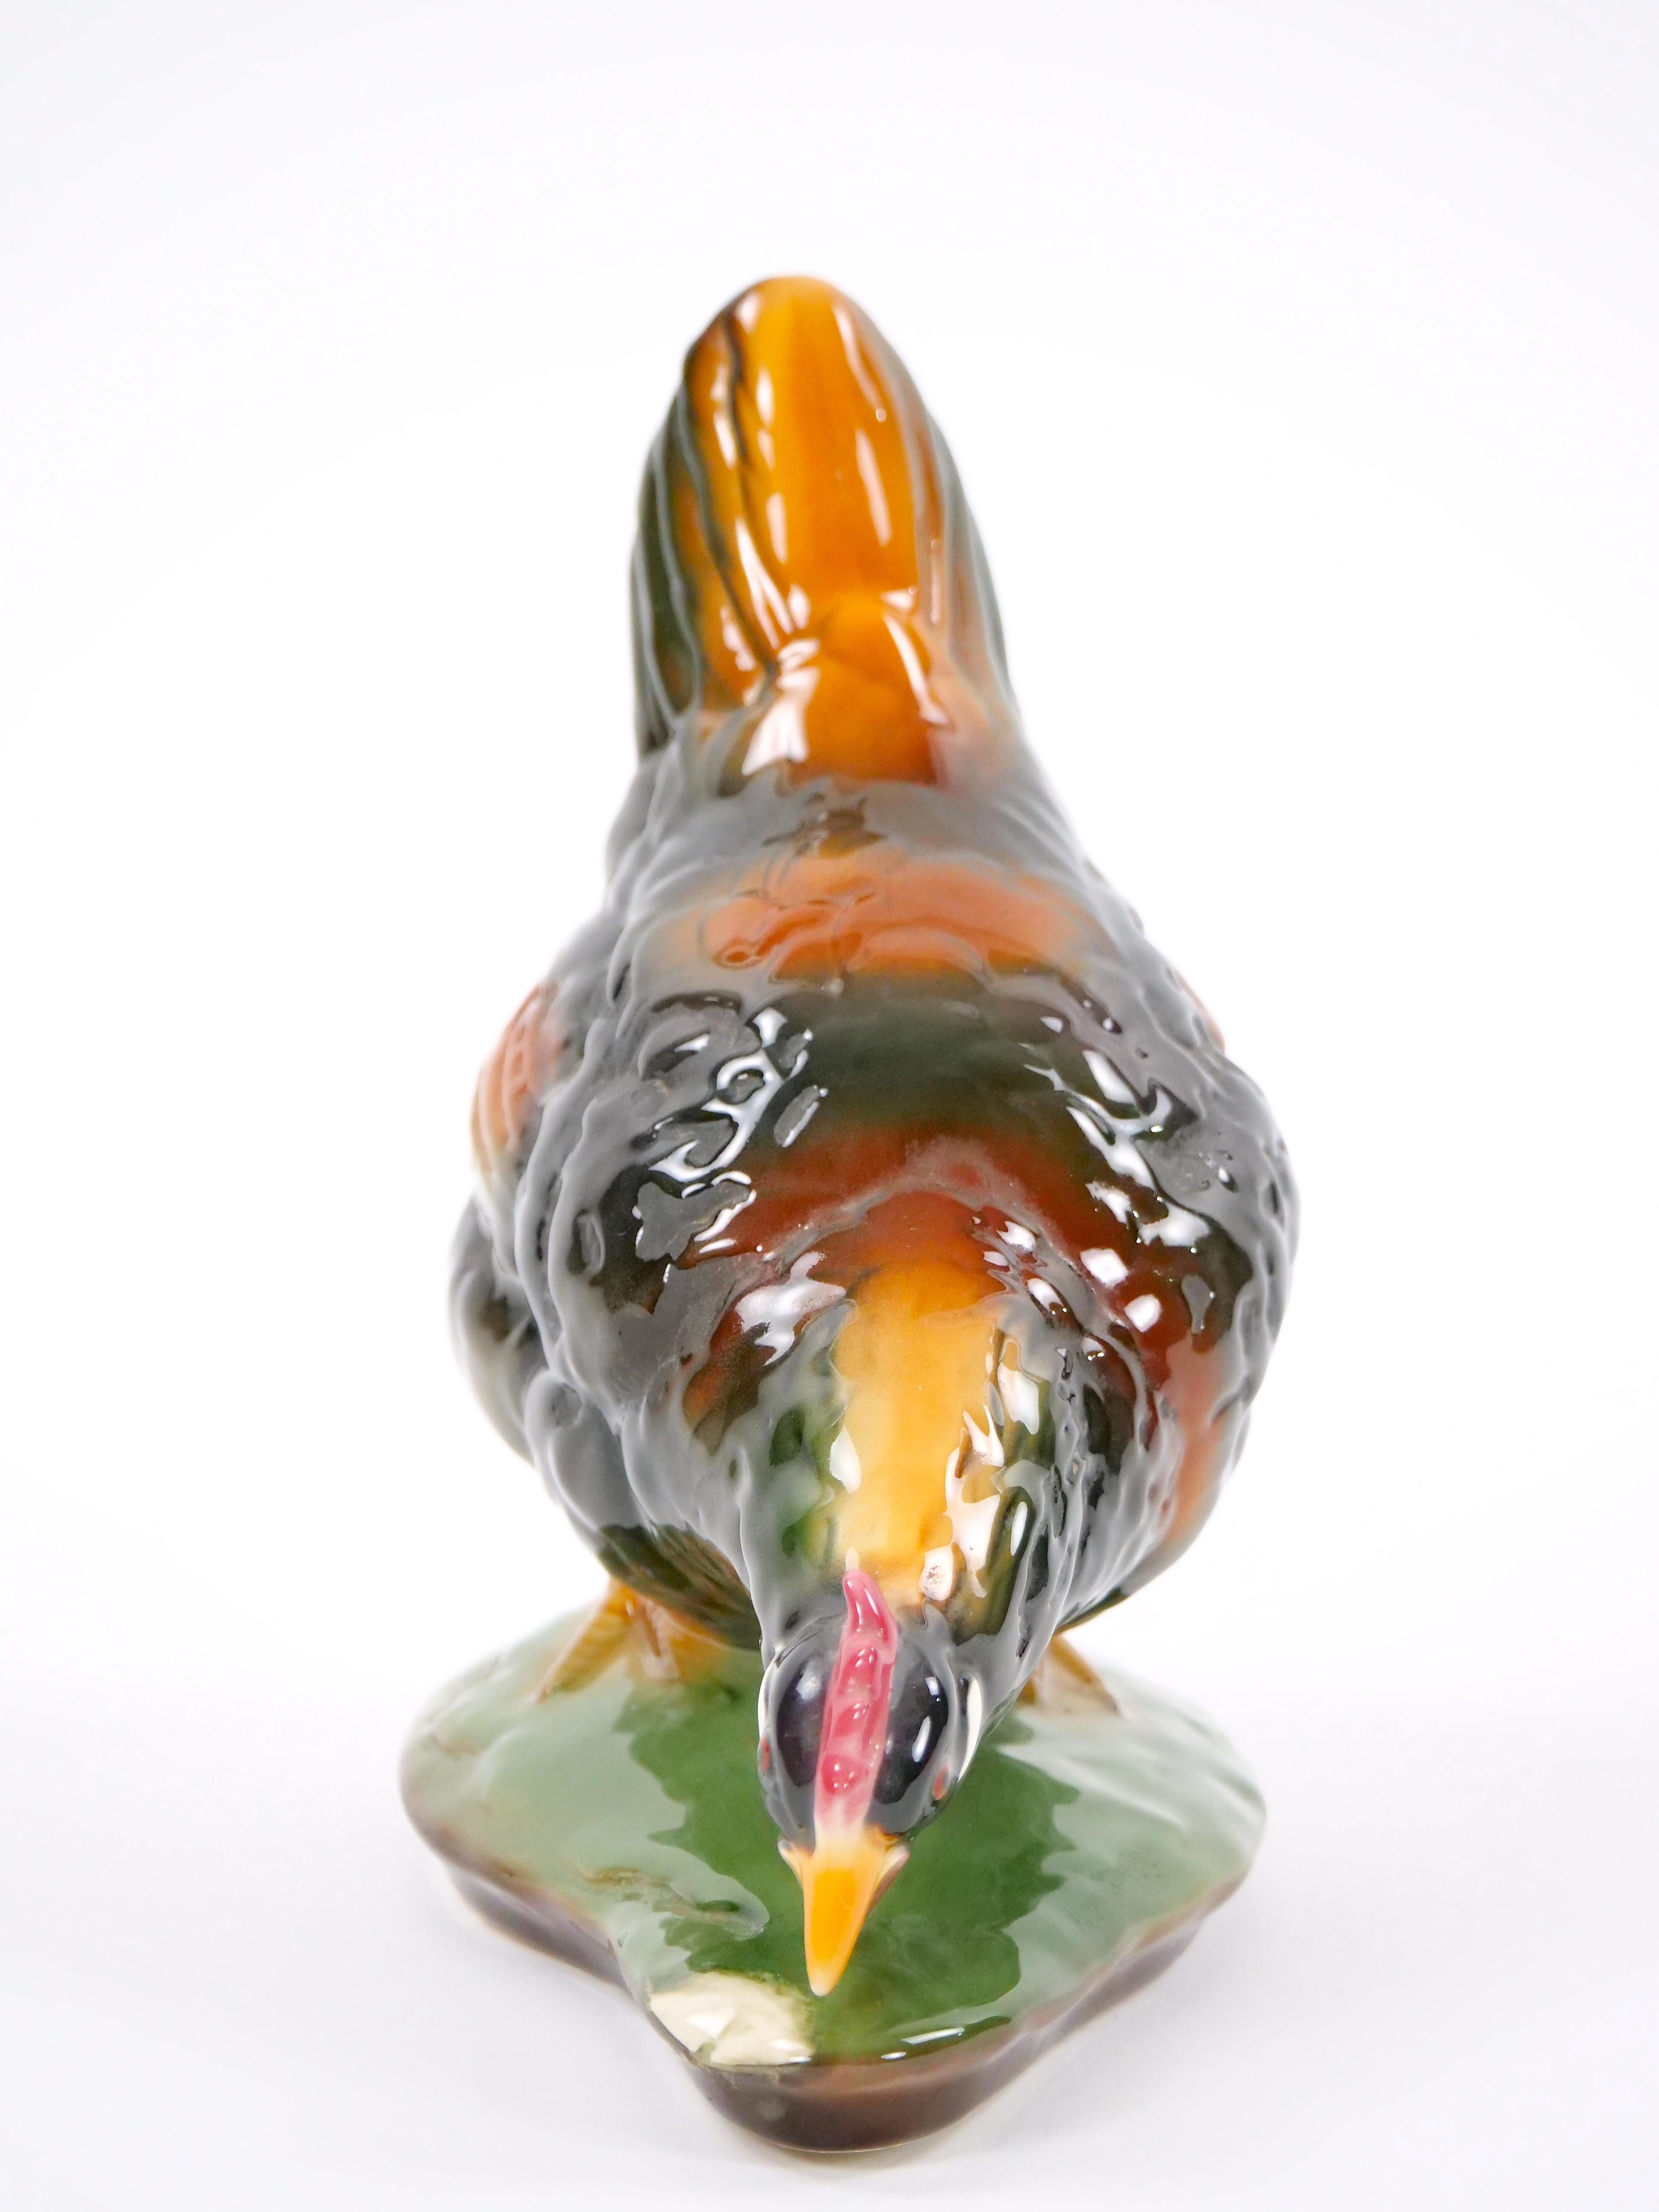 Step into the charm of the early 20th century with this delightful North American Hand-Grafted and Painted Glazed Porcelain Tableware, featuring a captivating chicken decorative sculpture. Meticulously crafted, this piece evokes the era's nostalgia